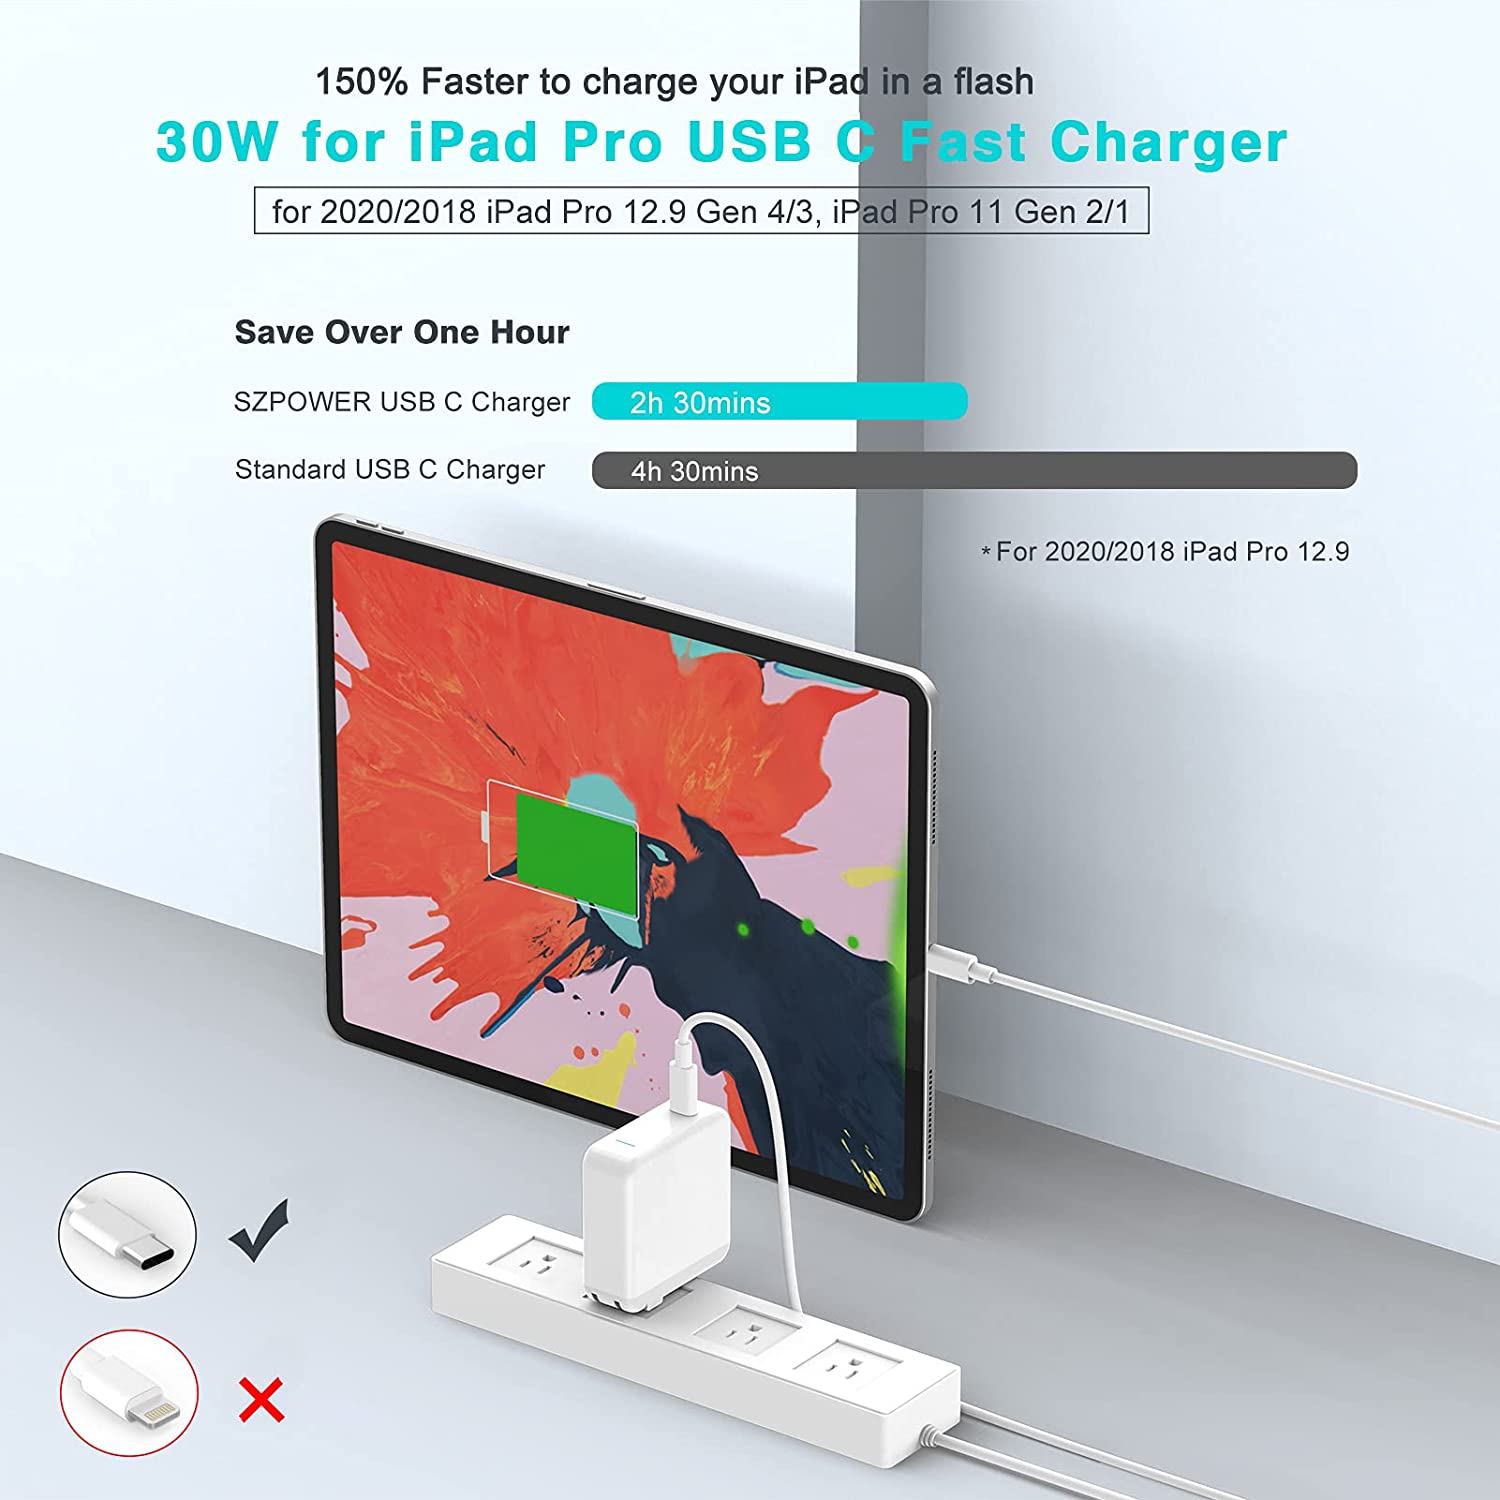 SZpower 61W USB-C Wall Charger for MacBook, iPad, Android, PC (White) - image 4 of 7